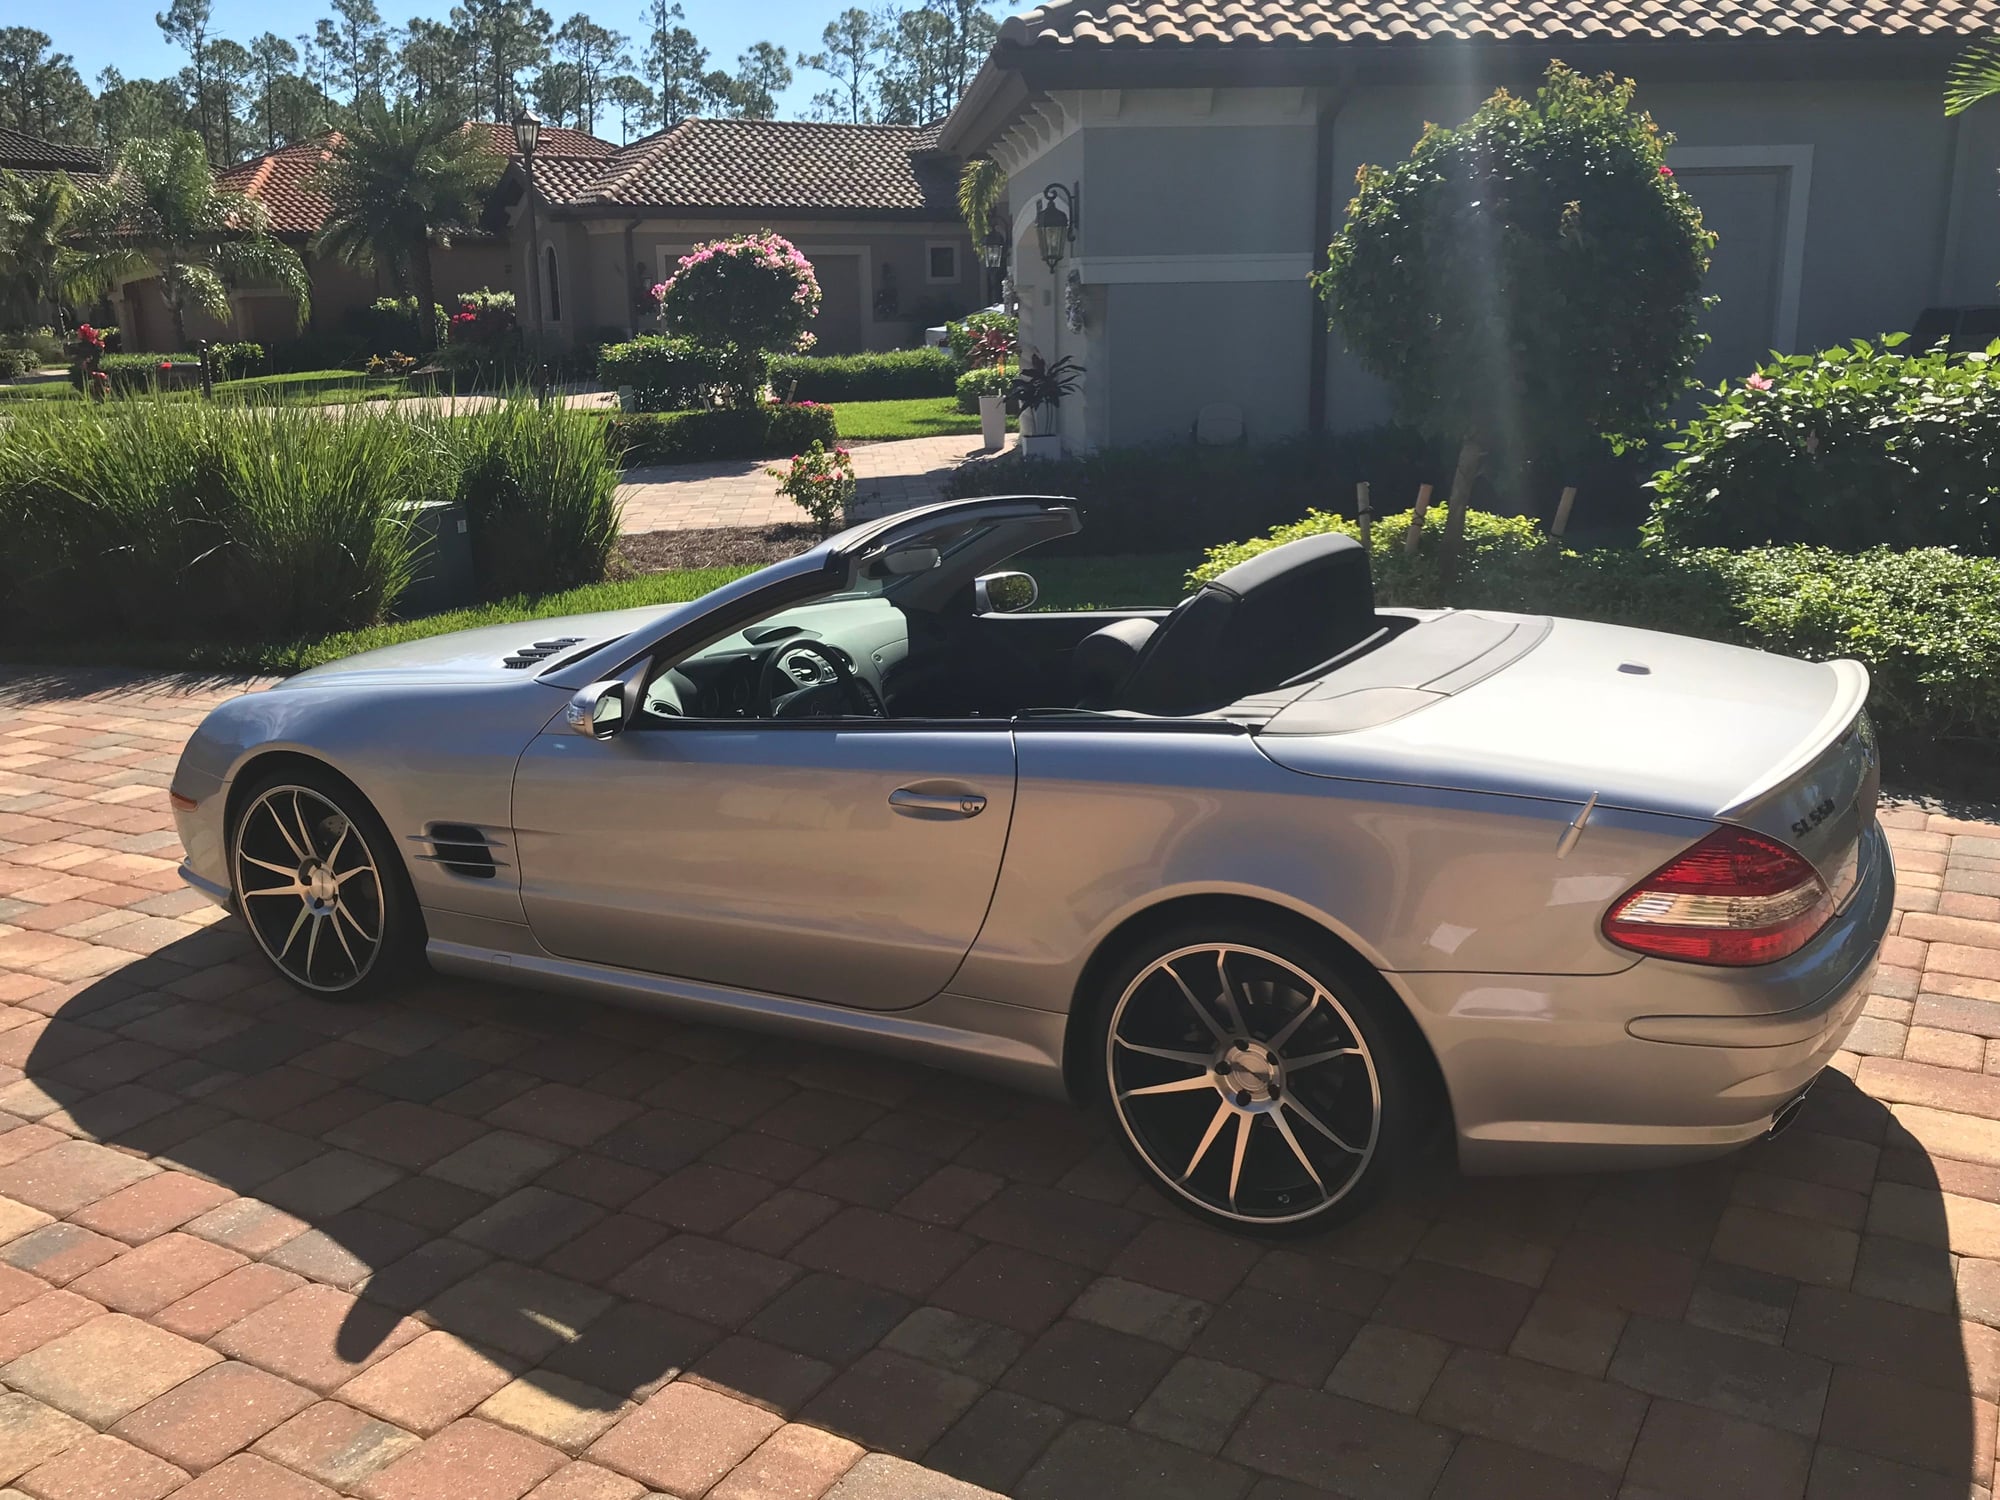 2007 Mercedes-Benz SL550 - 2007 - SL550 - AMG package - 45K Miles - Florida - Very Clean - Excellent Condition - Used - VIN WDBSK71F57F119151 - 45,500 Miles - 2WD - Automatic - Convertible - Silver - Naples, FL 34119, United States